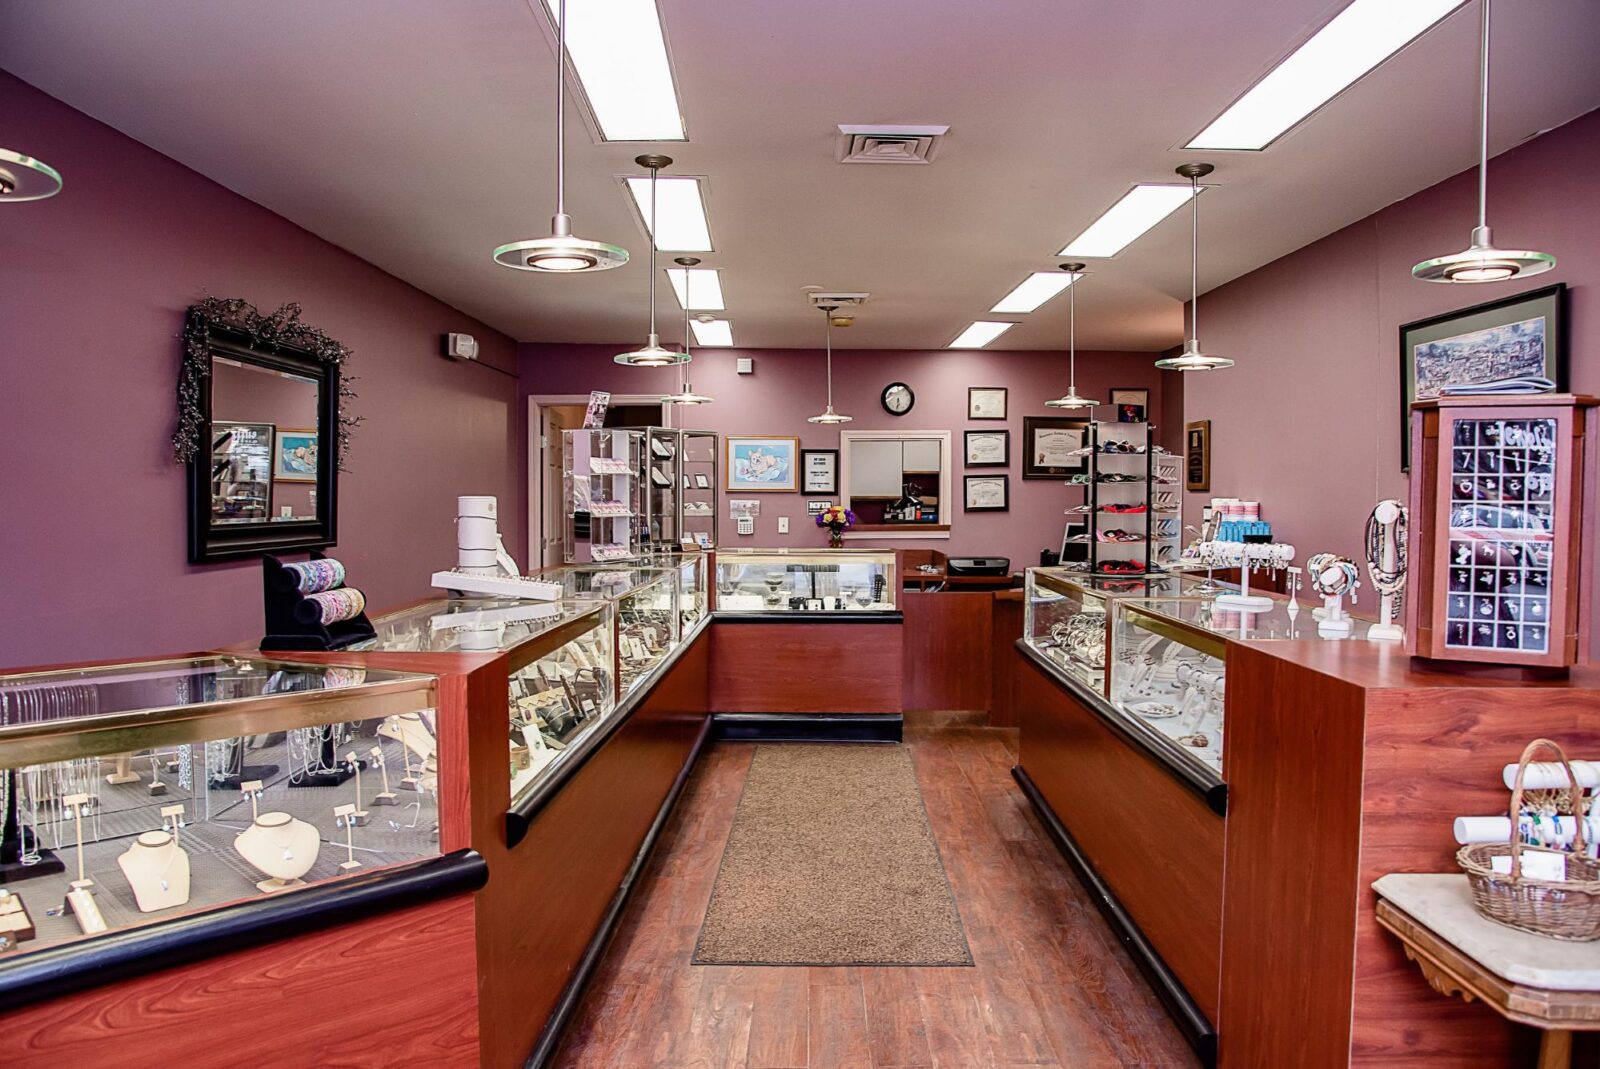 Interior of the store featuring jewelry display cases